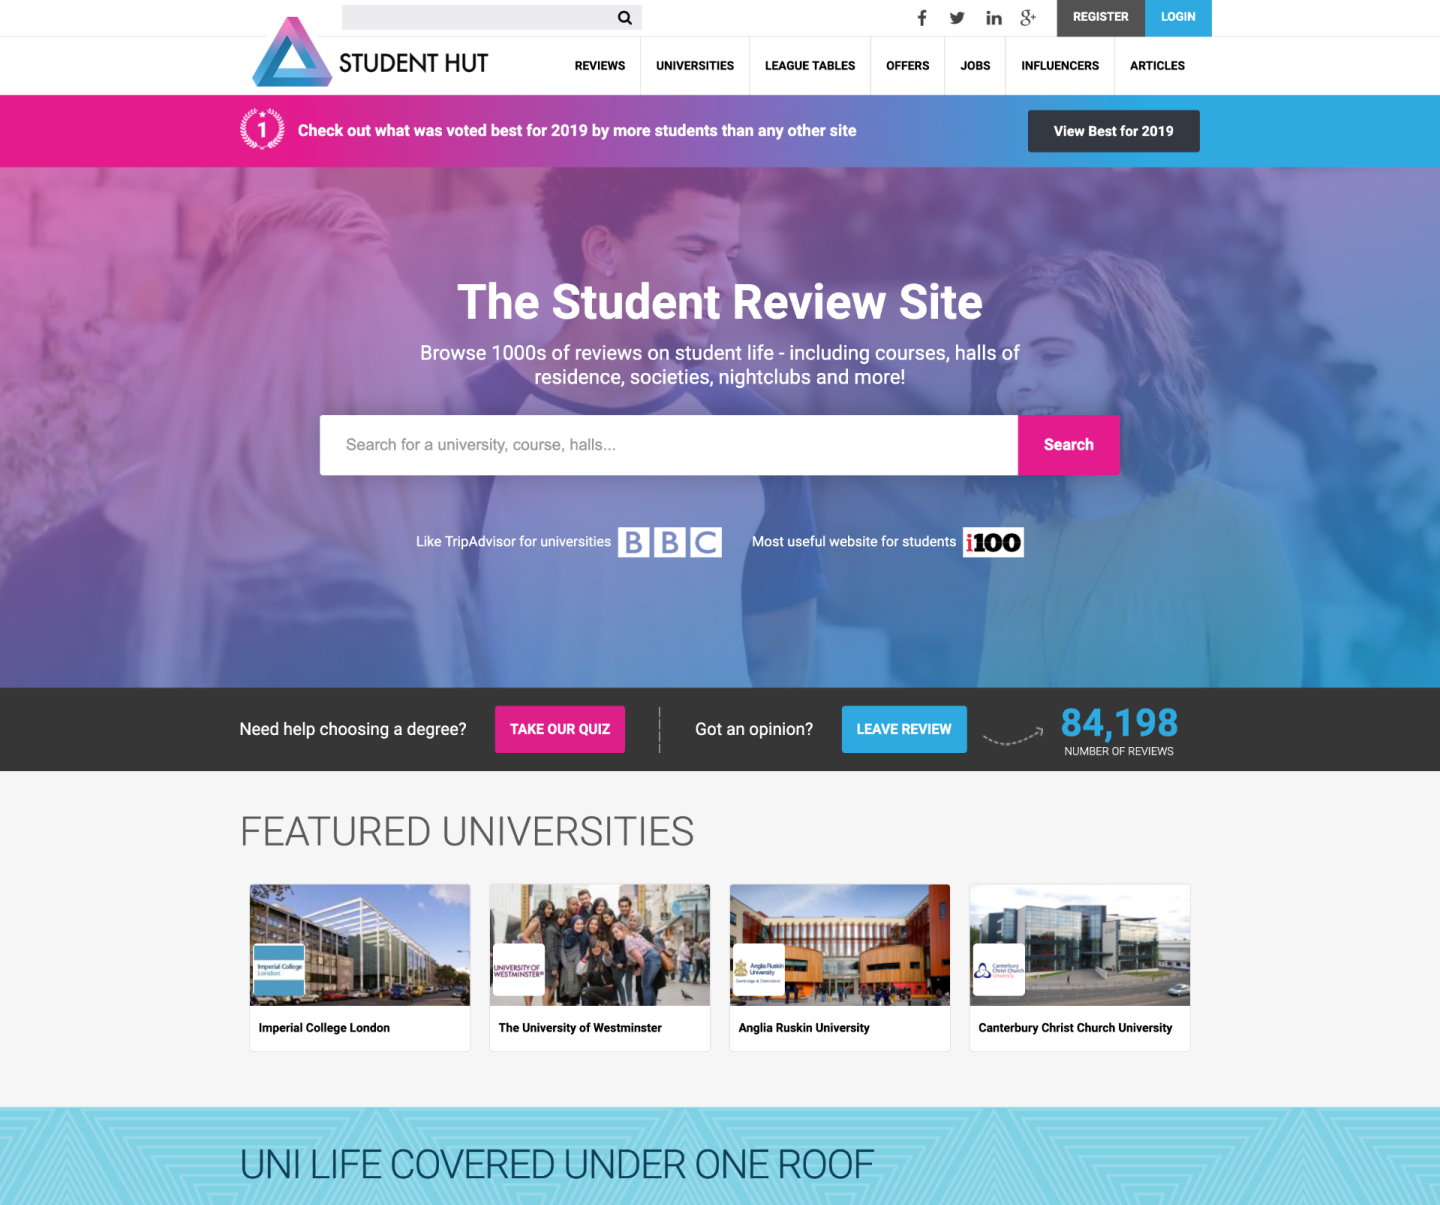 Previous student hut home page